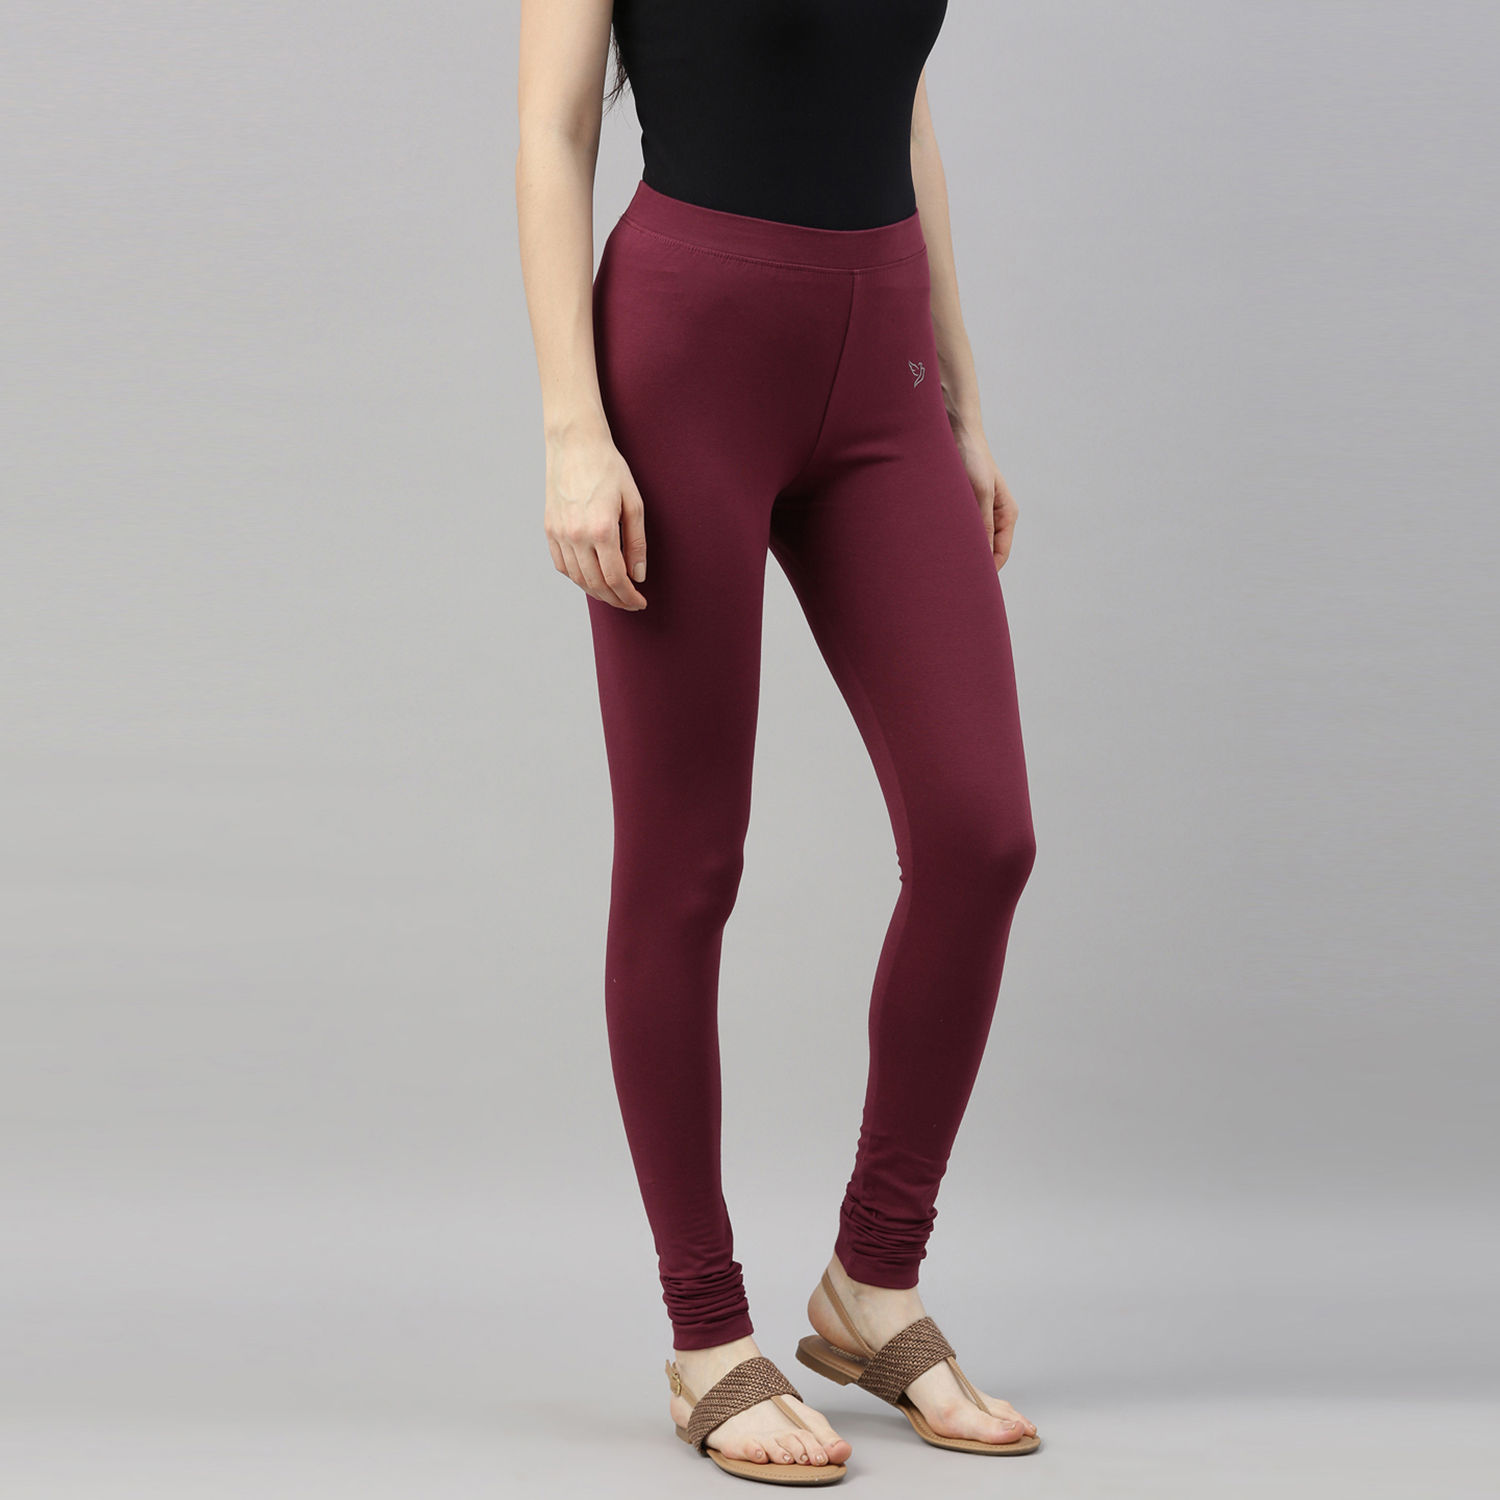 Twin Birds Soul Gem Leggings - Get Best Price from Manufacturers &  Suppliers in India